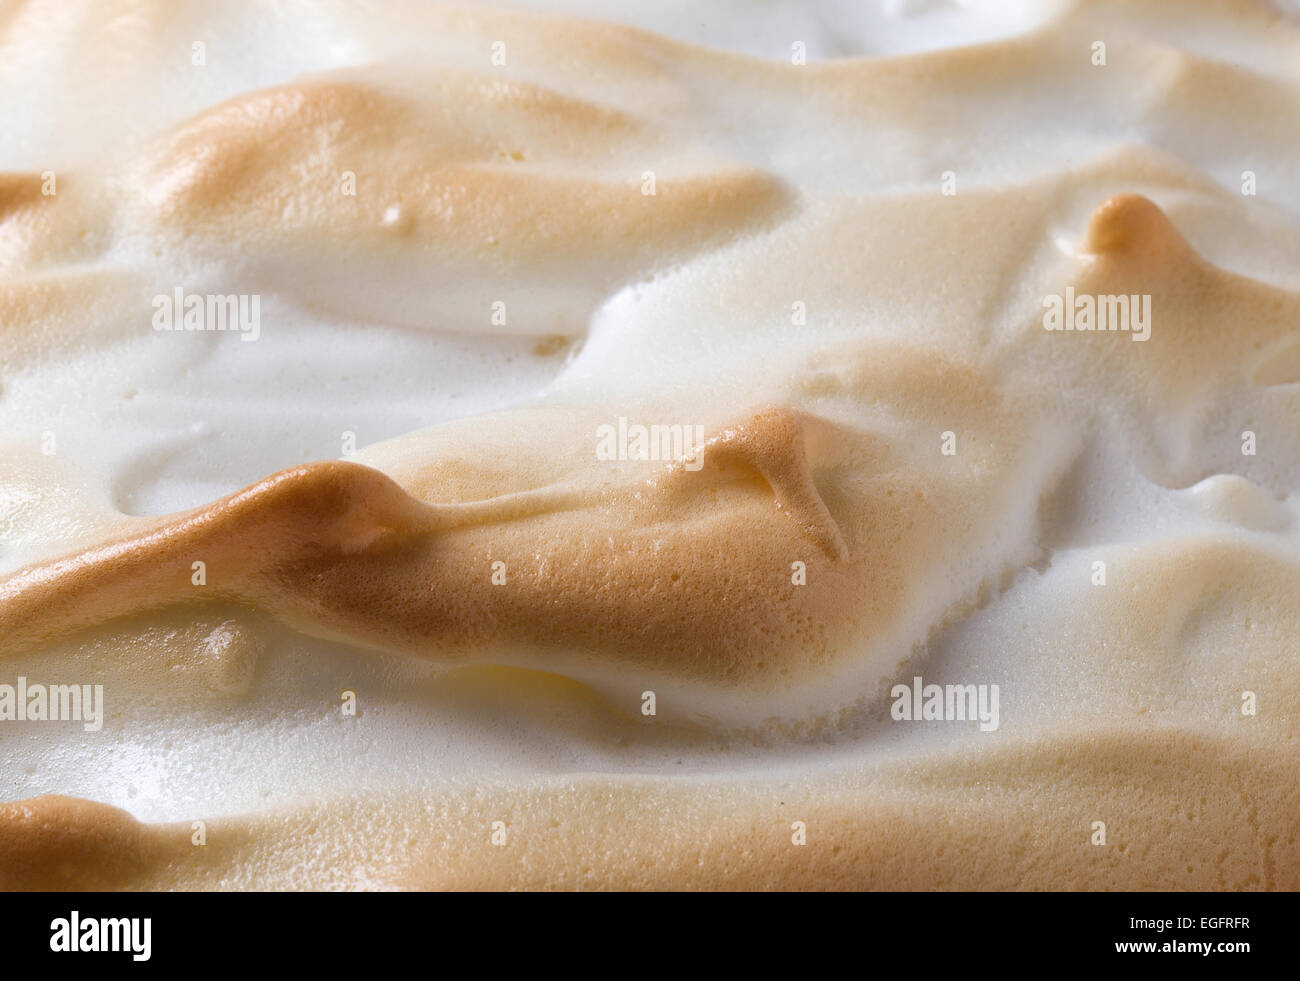 Closeup on the waves of perfectly cooked meringe a homemade lemon meringue pie, a classic of European dessert cuisine Stock Photo